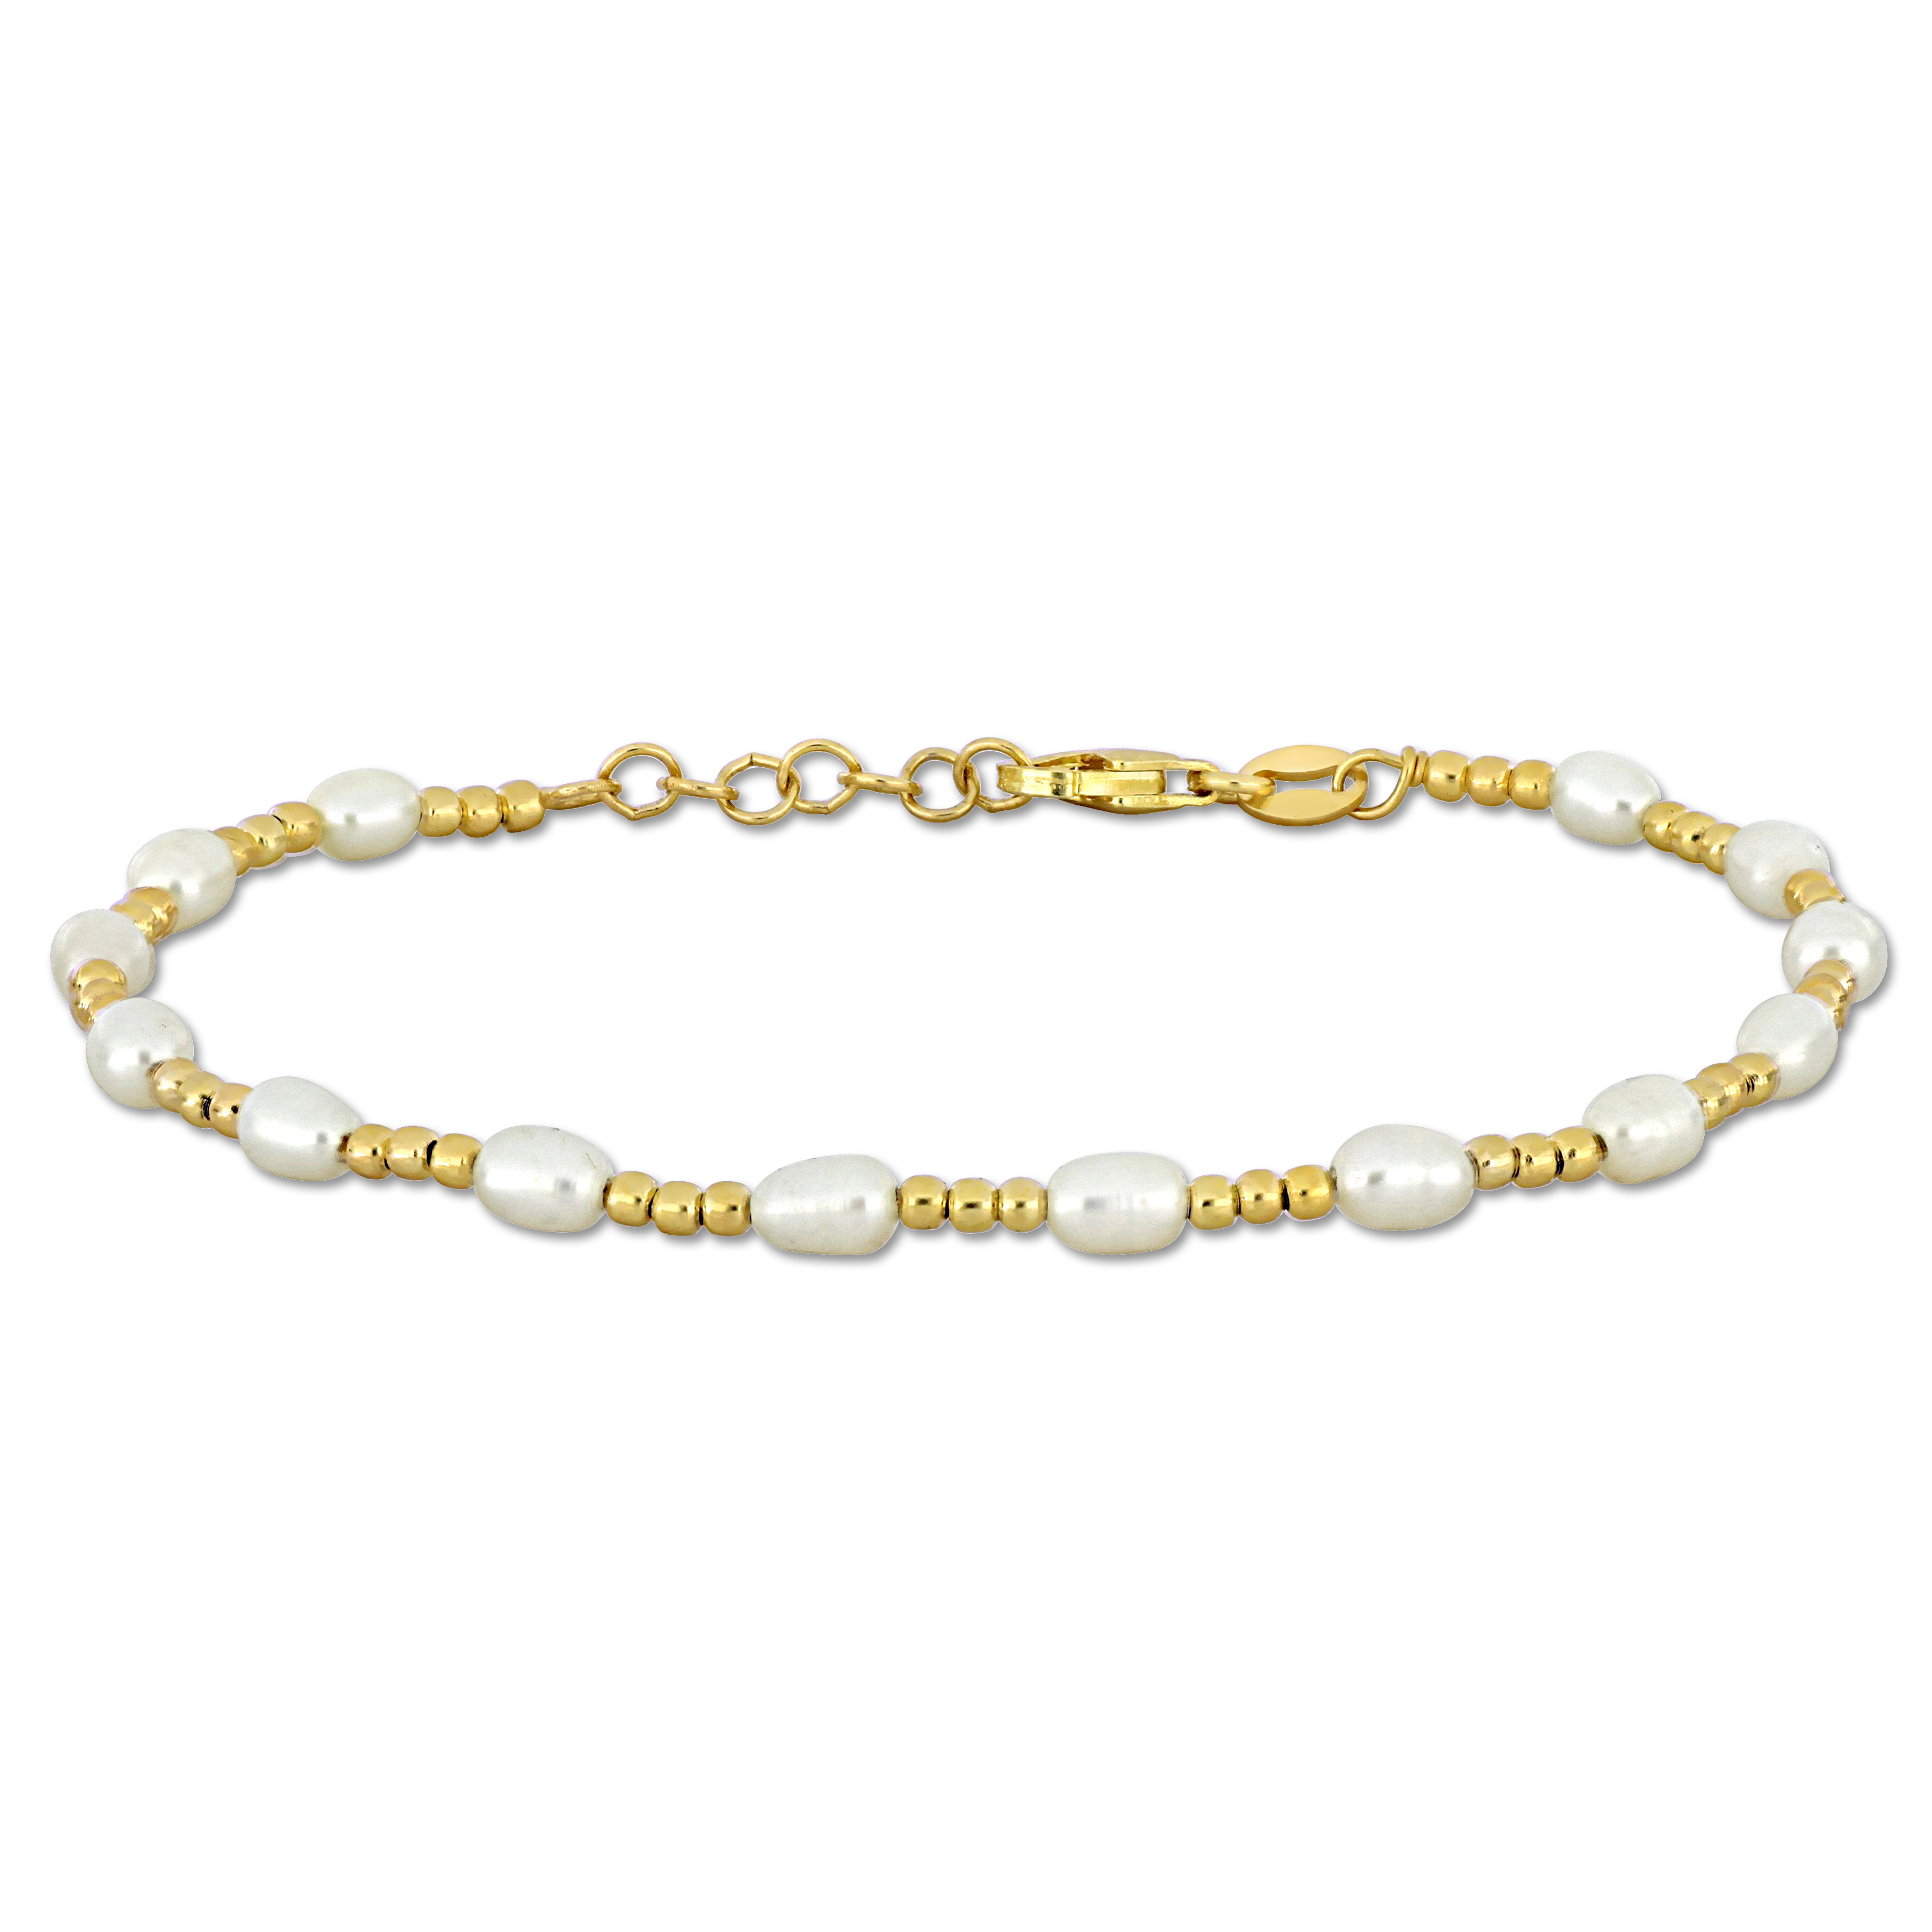 3.5-5 MM Cultured Freshwater Pearl and Bead Station Bracelet in Yellow Plated Sterling Silver